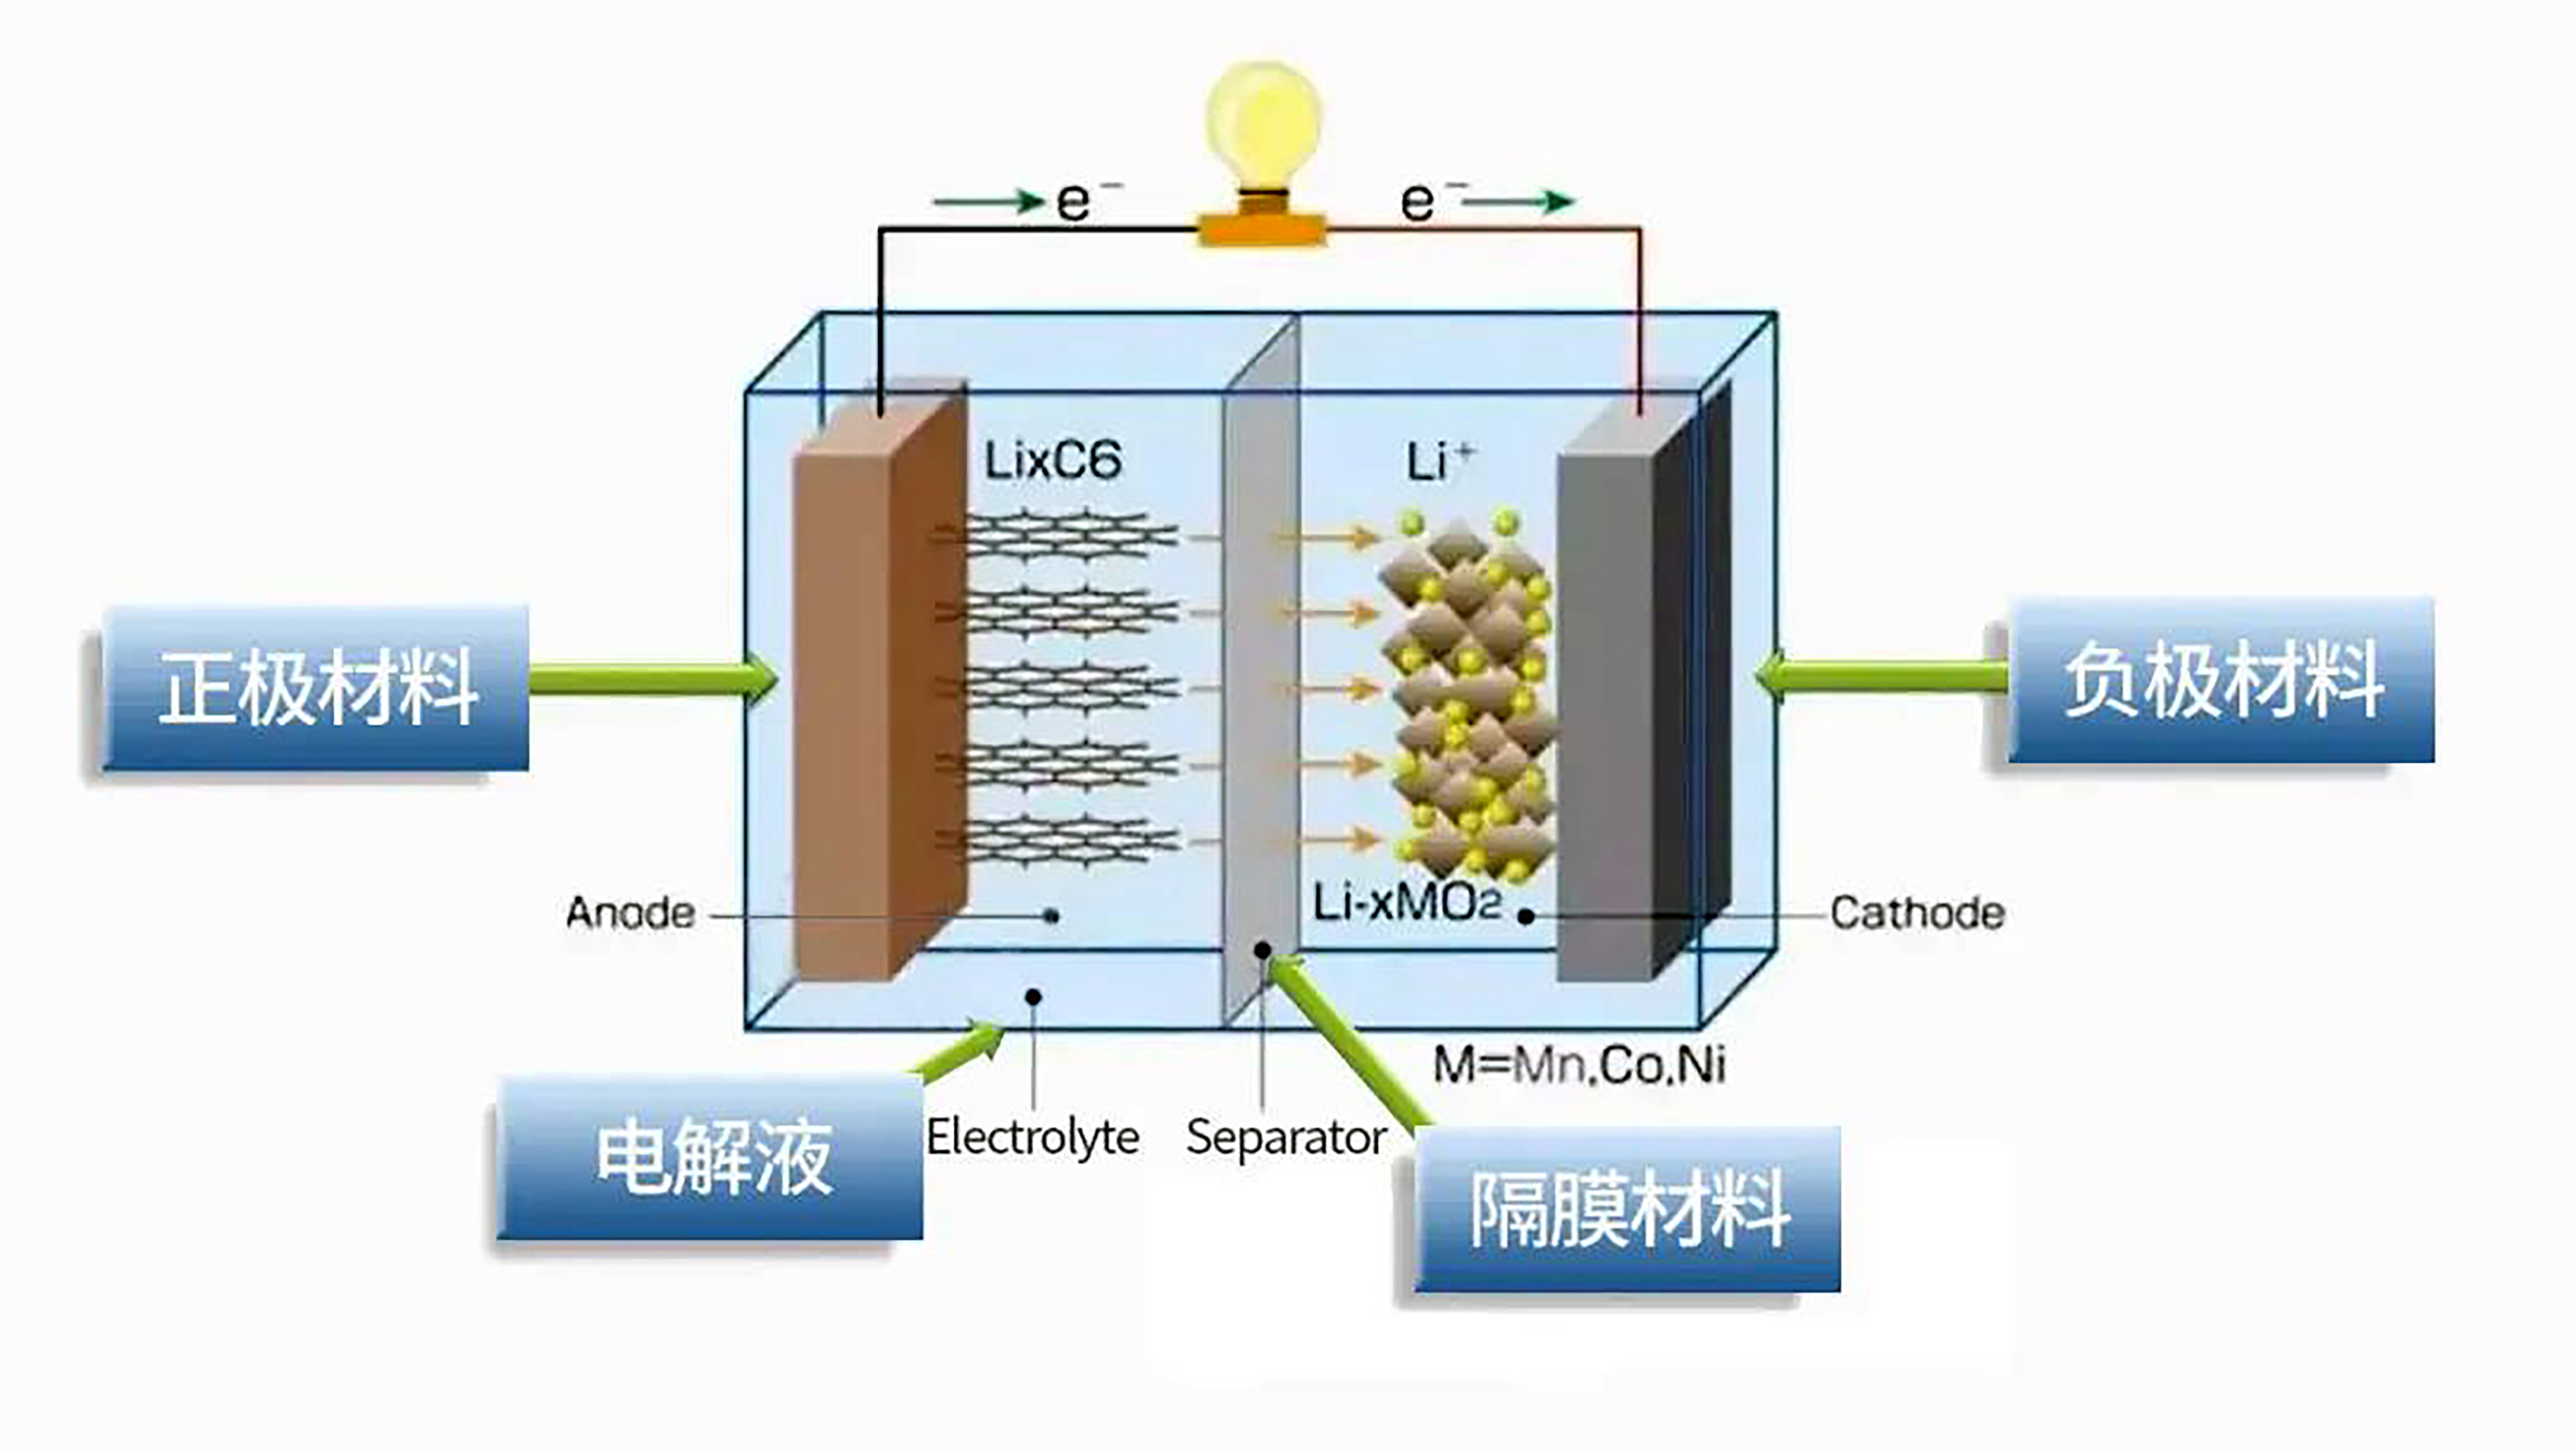 The front-end process in the lithium battery production